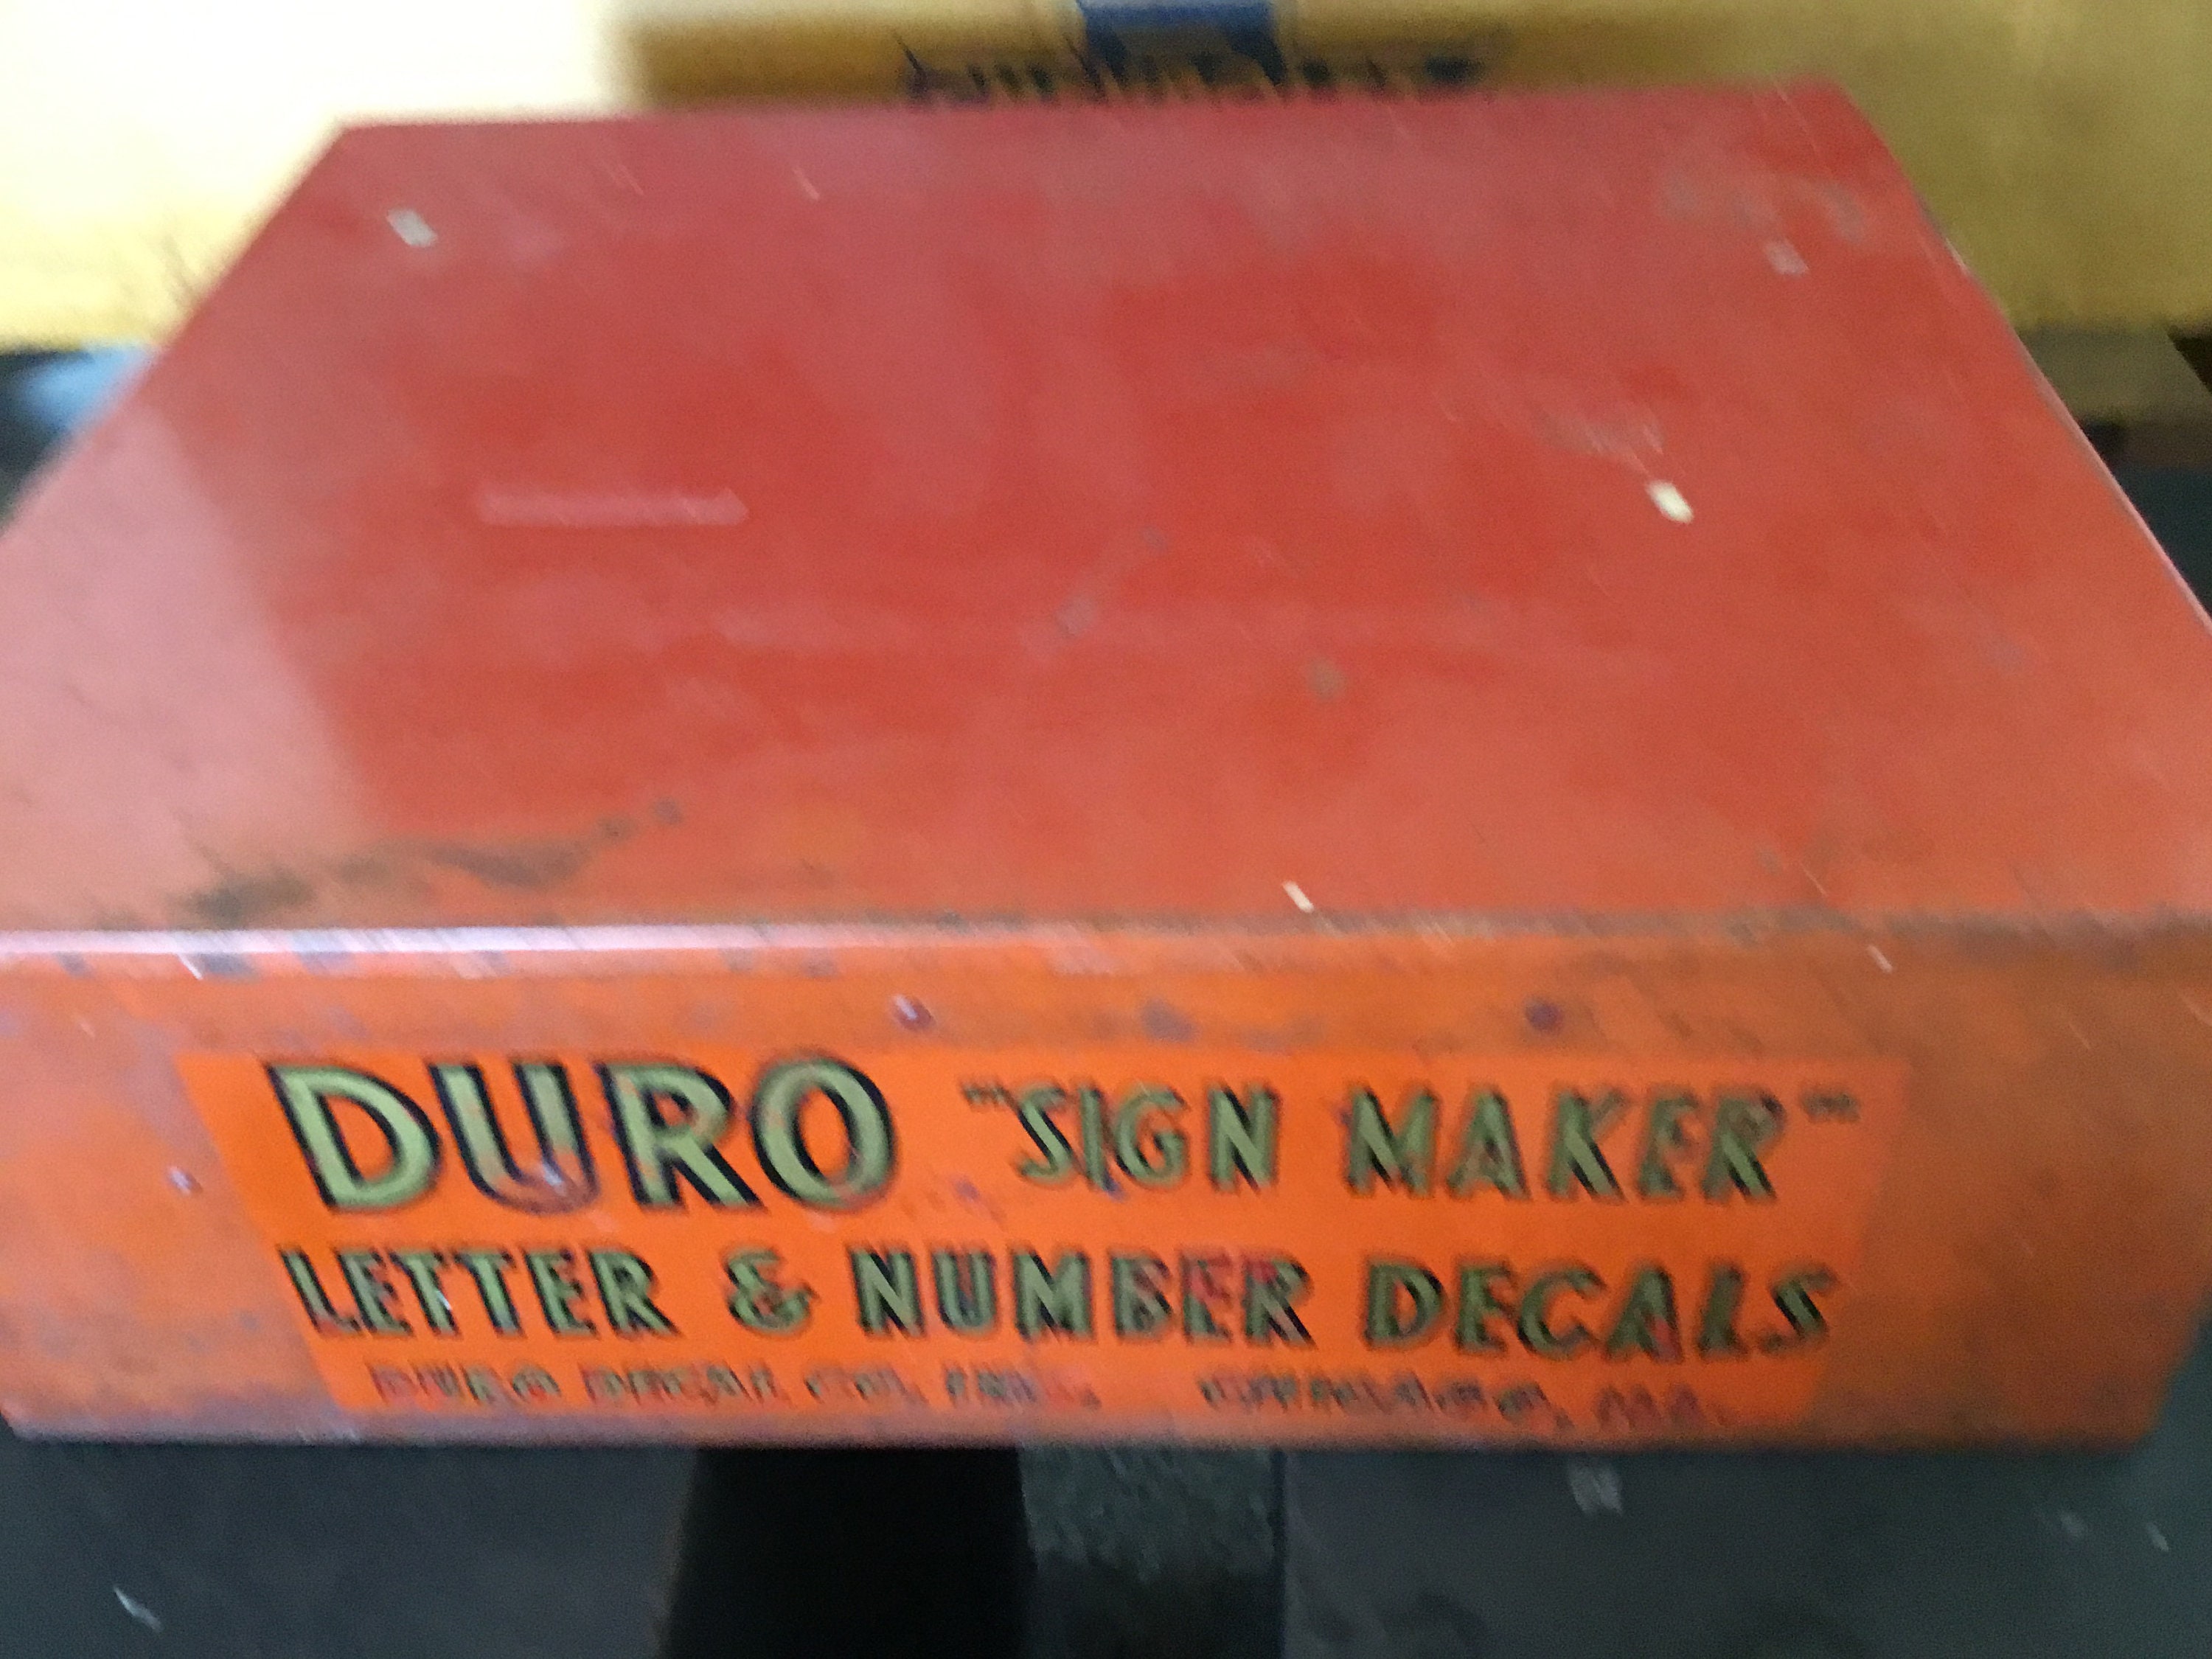 DURO SIGN MAKER DECALS AND BOX ORIGINAL STORE DISPLAY BOXVERY NICE!